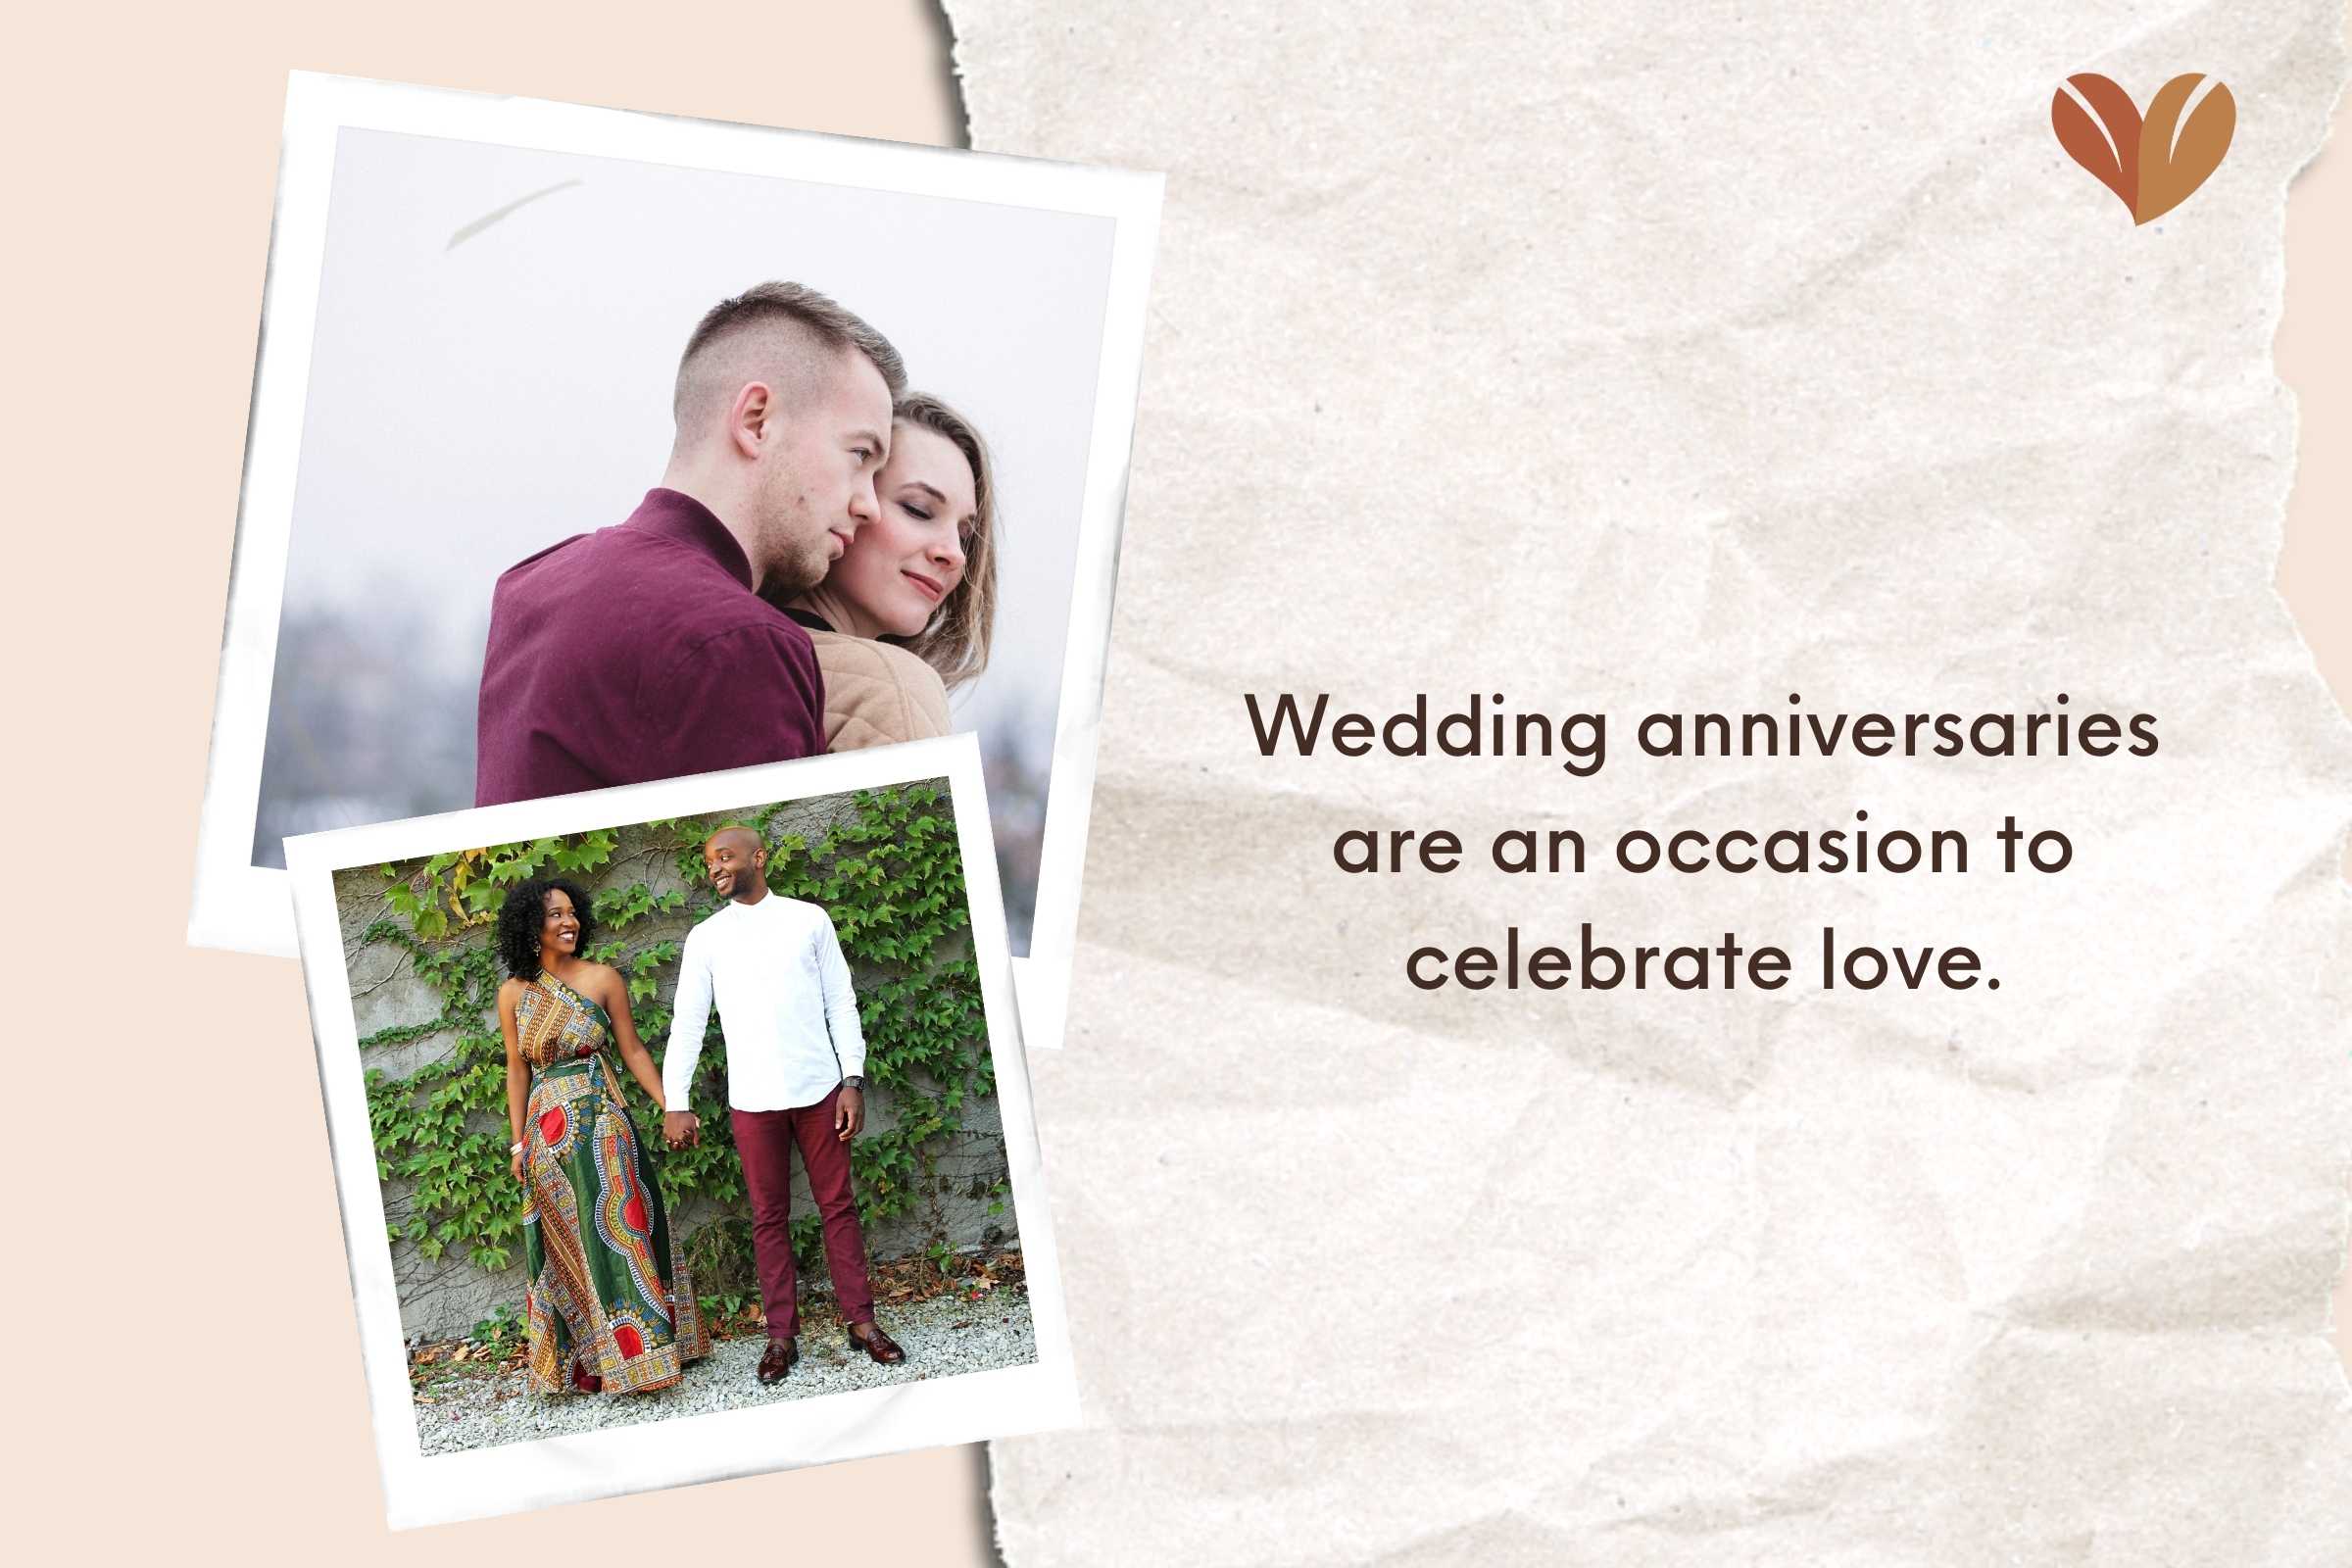 Celebrating love, laughter, and a lifetime of togetherness. Happy anniversary!